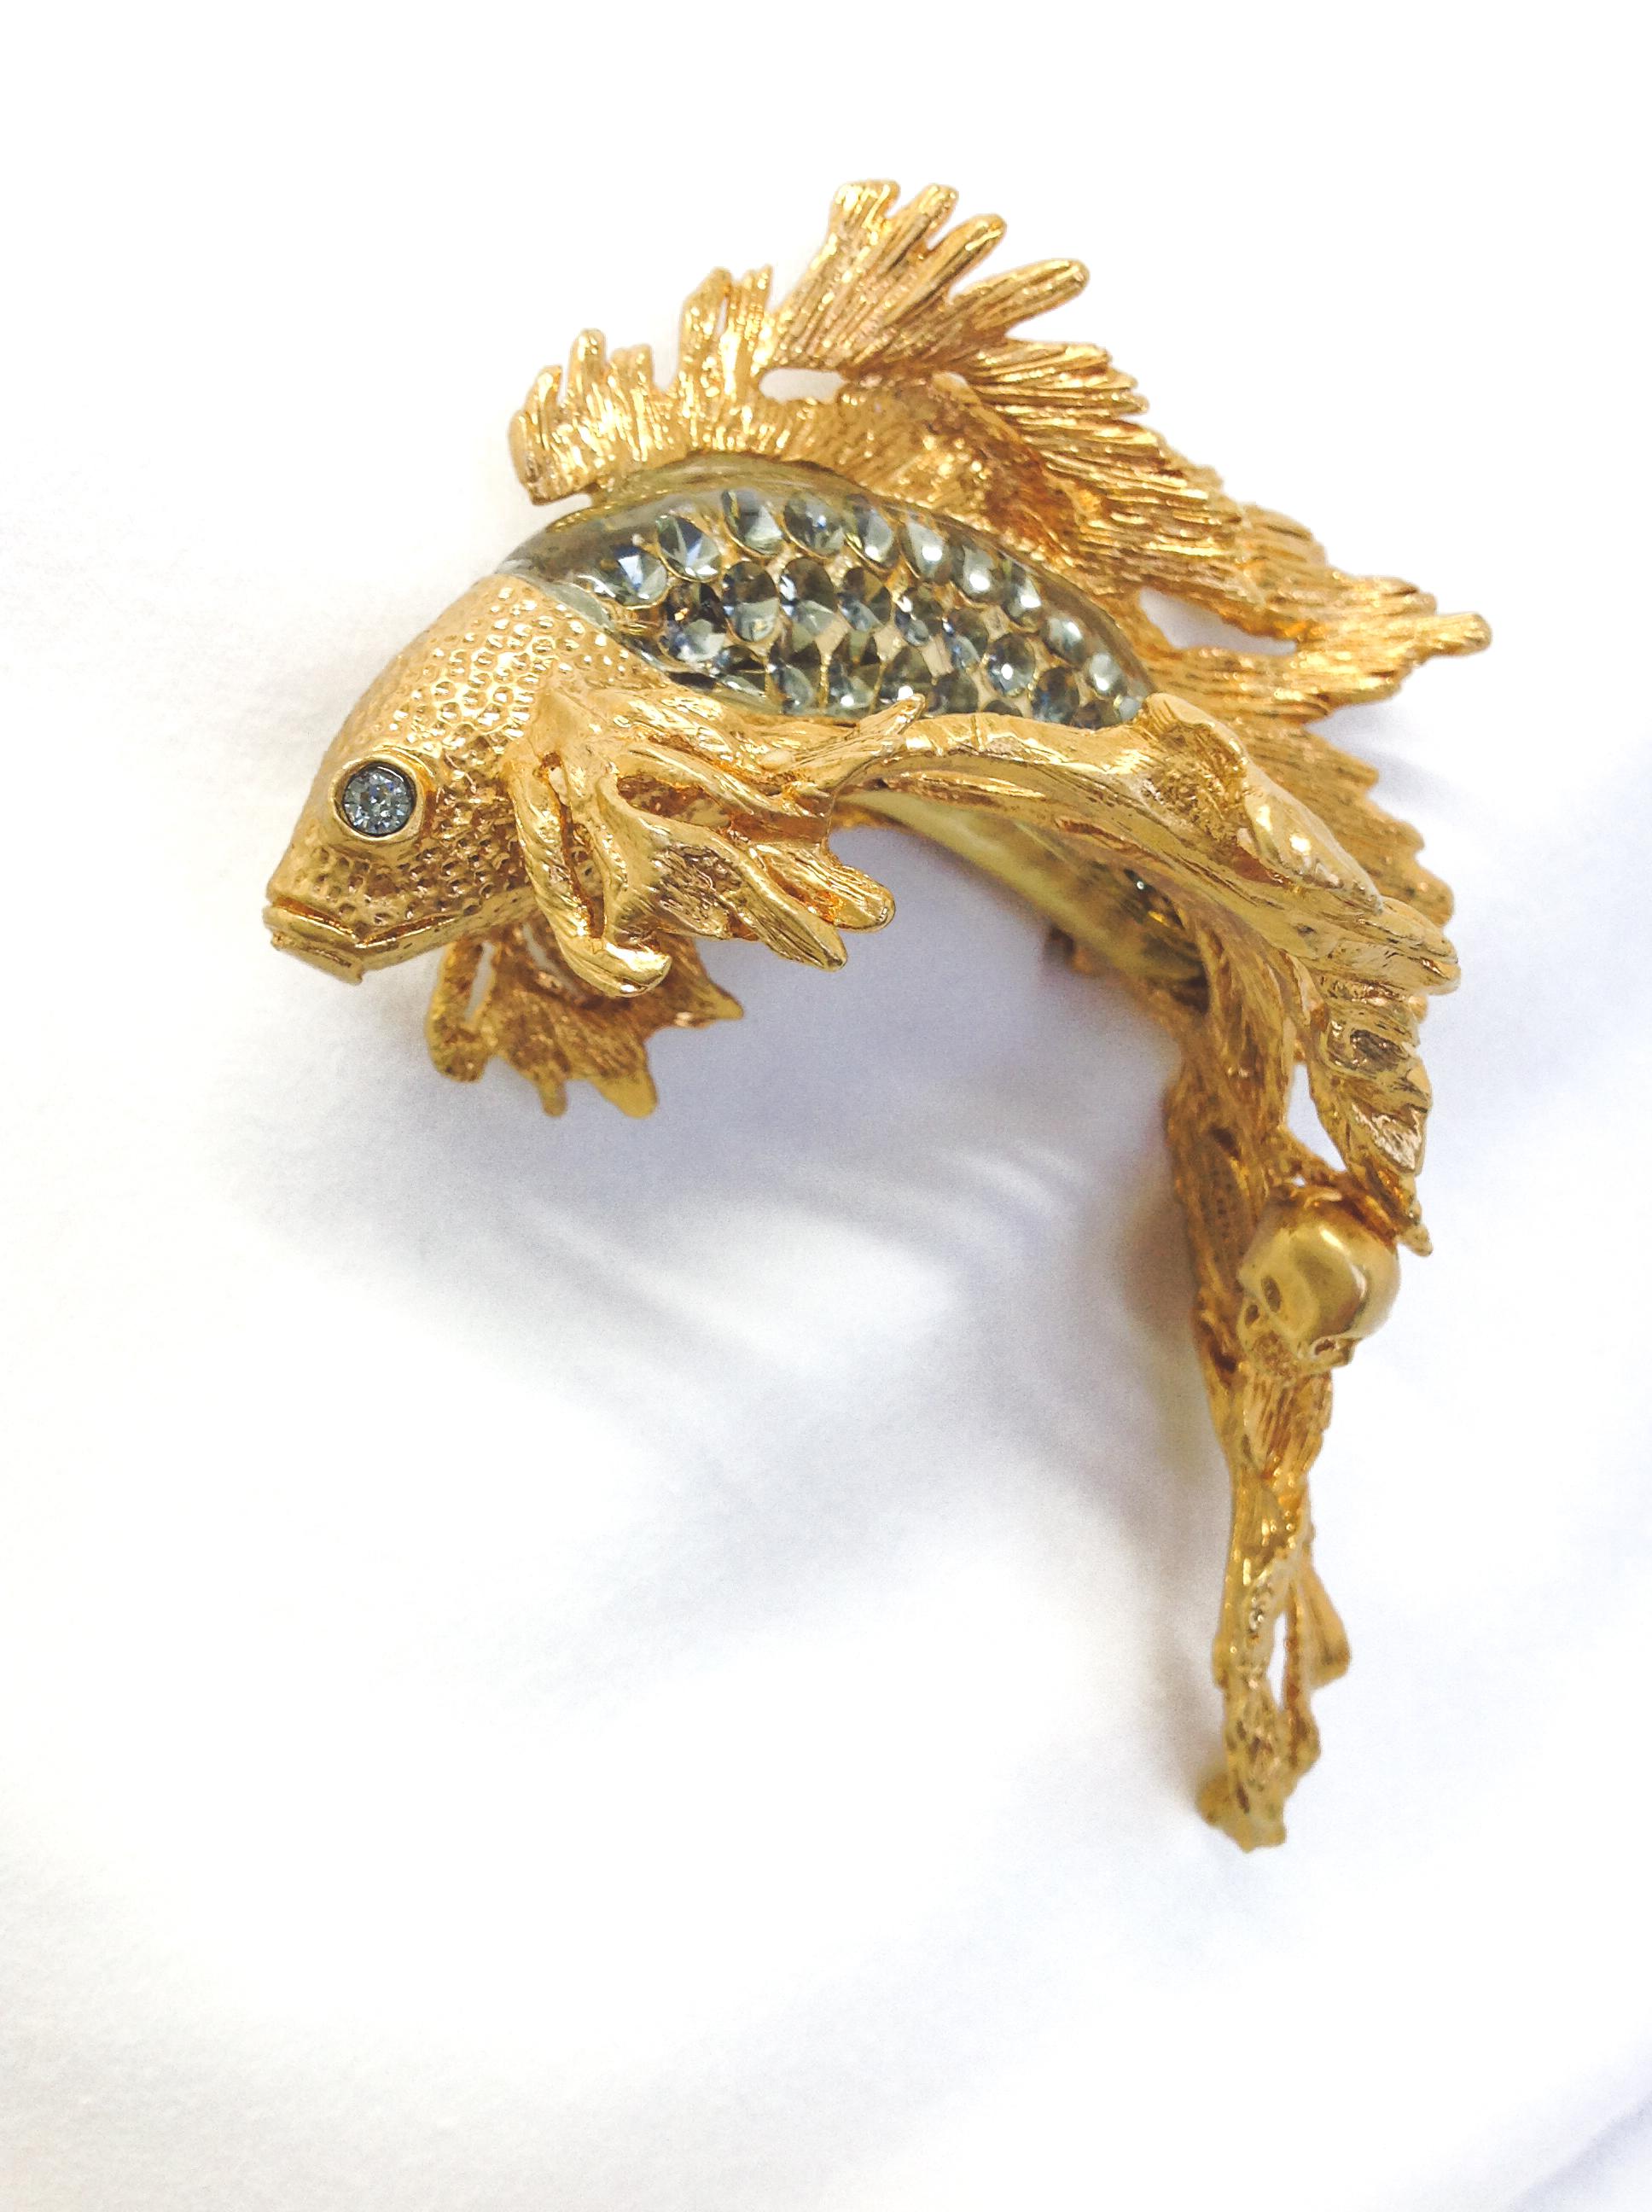 Alexander McQueen Brooch

Incredible asian inspired piece from the house of Alexander McQueen - designed to look like a Koi Carp leaping from the water

Details 
-Cast from brushed gold-plated brass and made in Italy
-Embellished with Swarovski